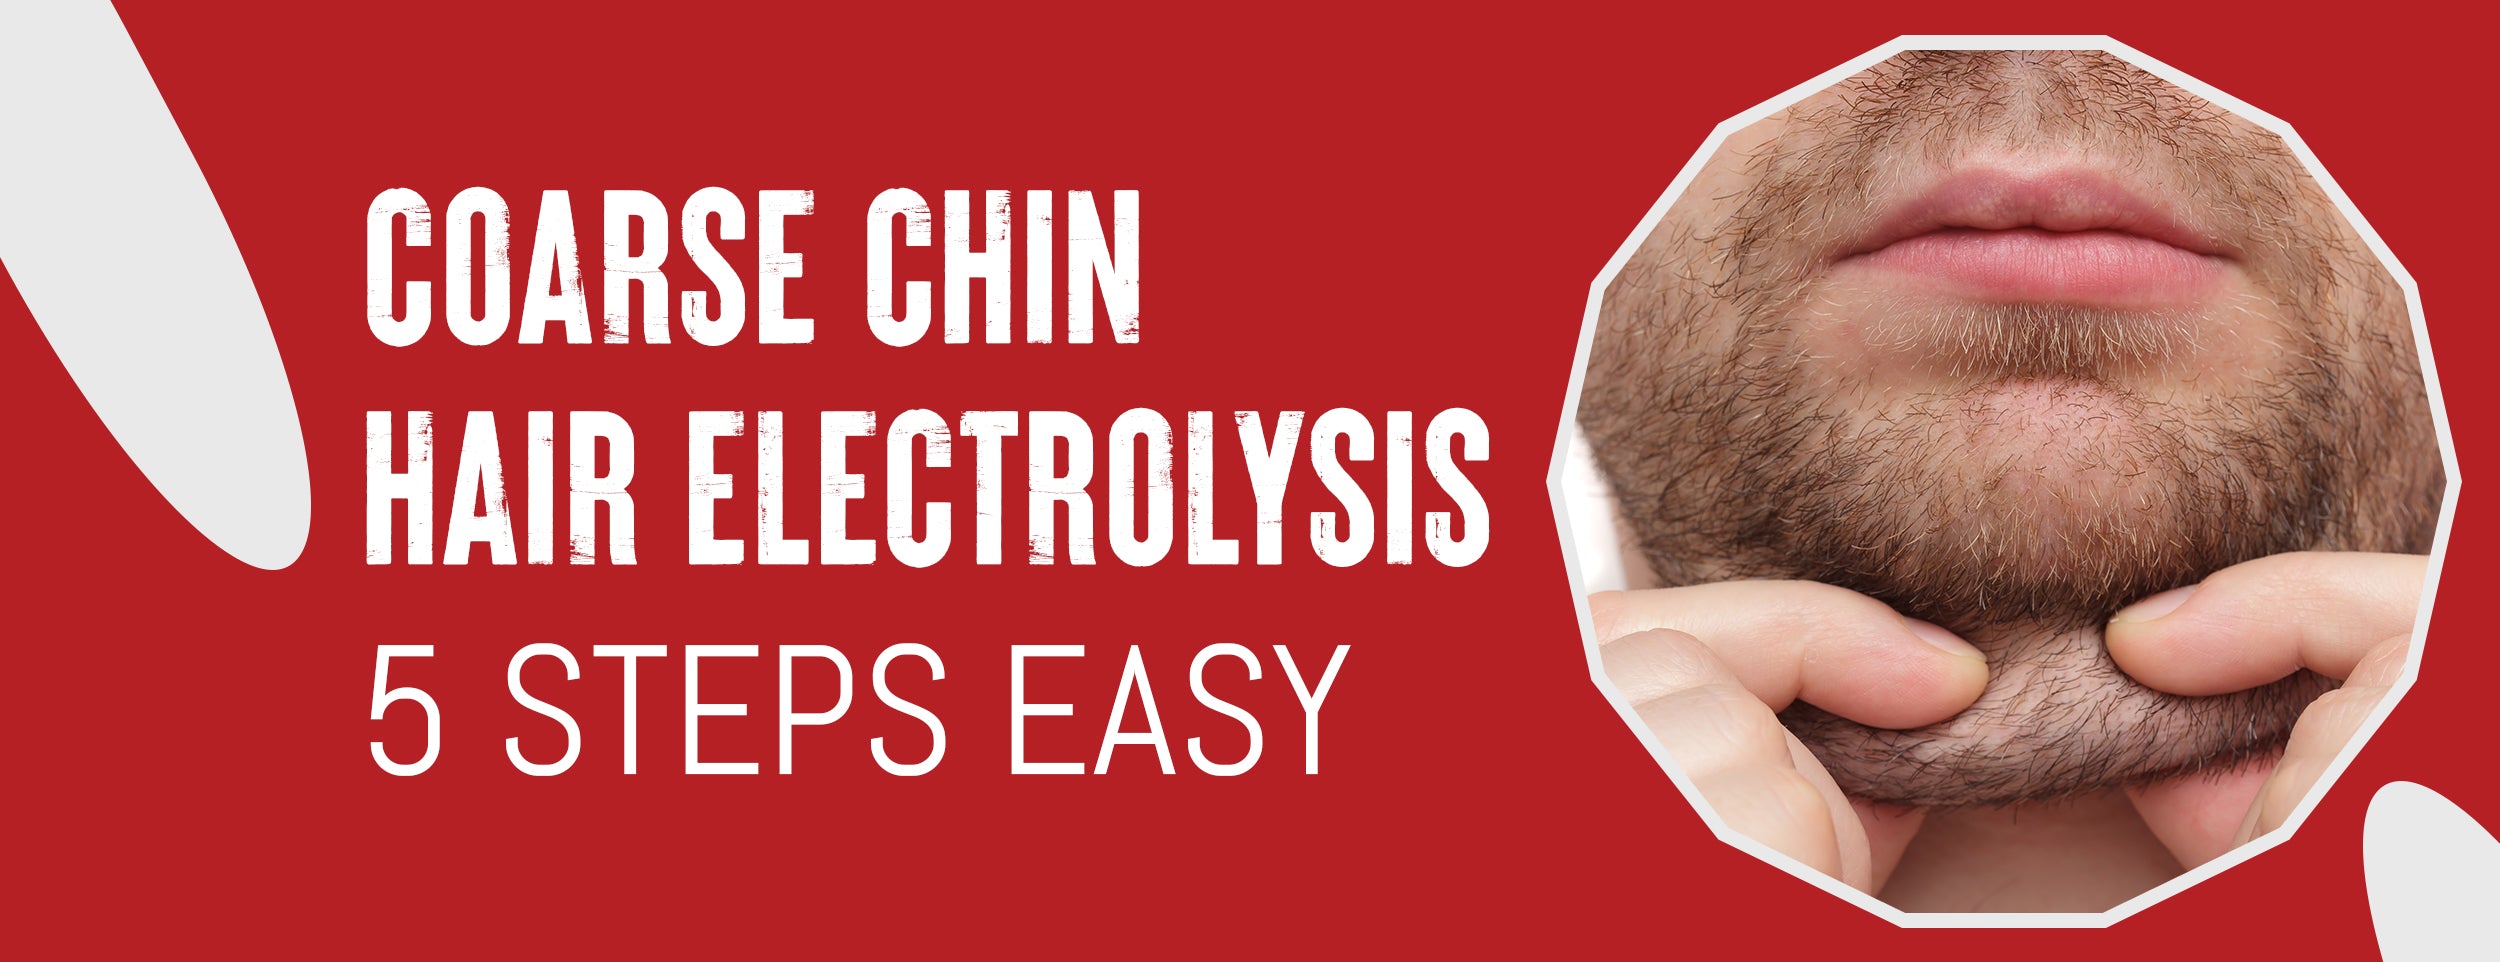 An electrolysis treatment for coarse chin hairs